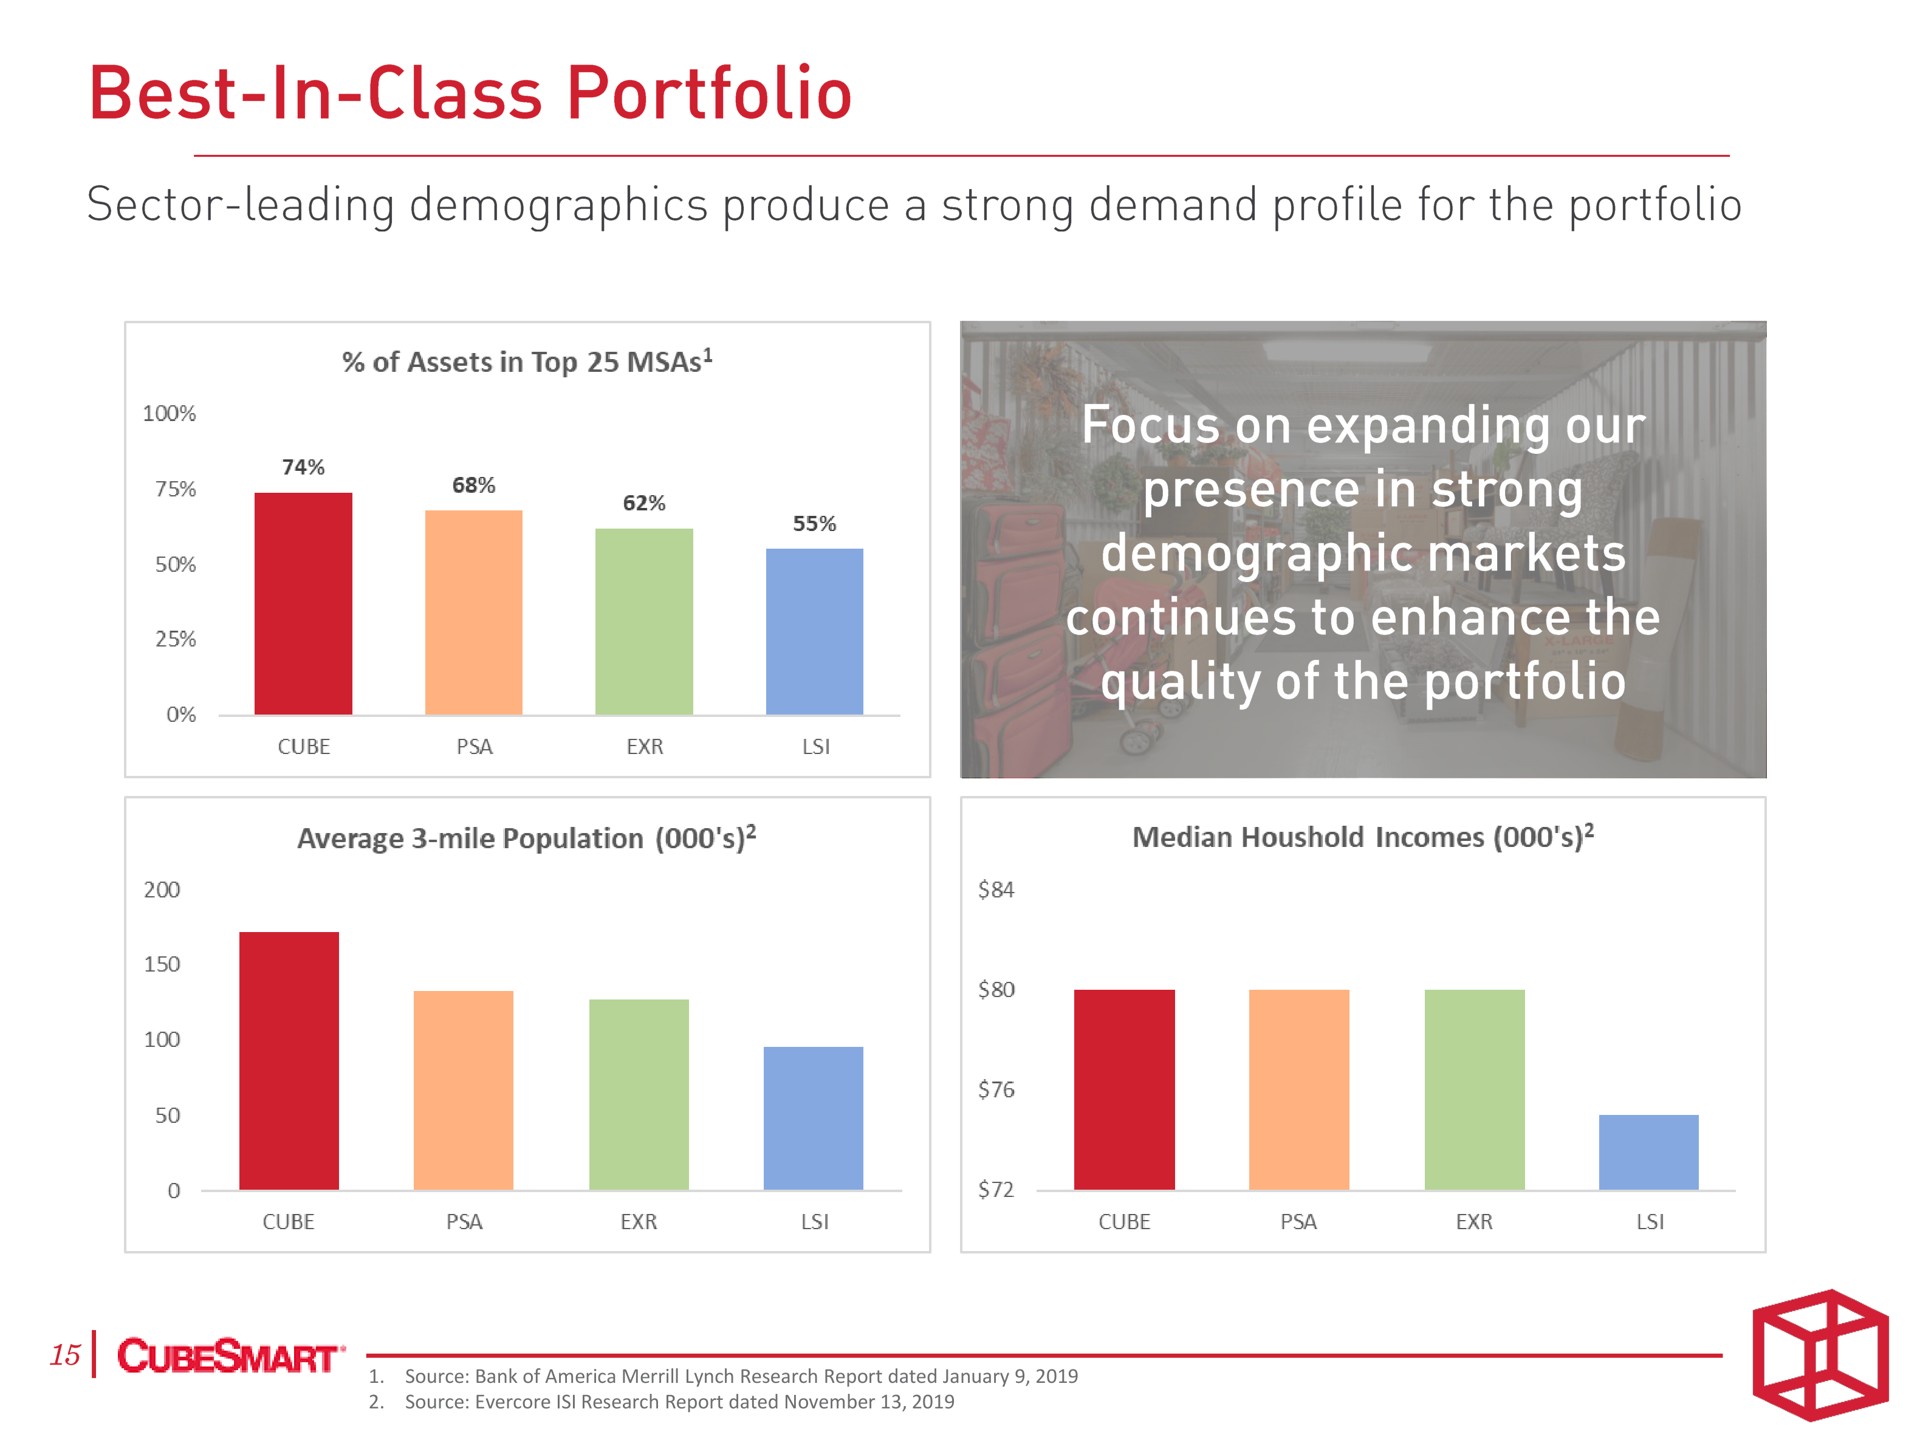 best in class portfolio focus on expanding our presence in strong demographic markets me | CubeSmart